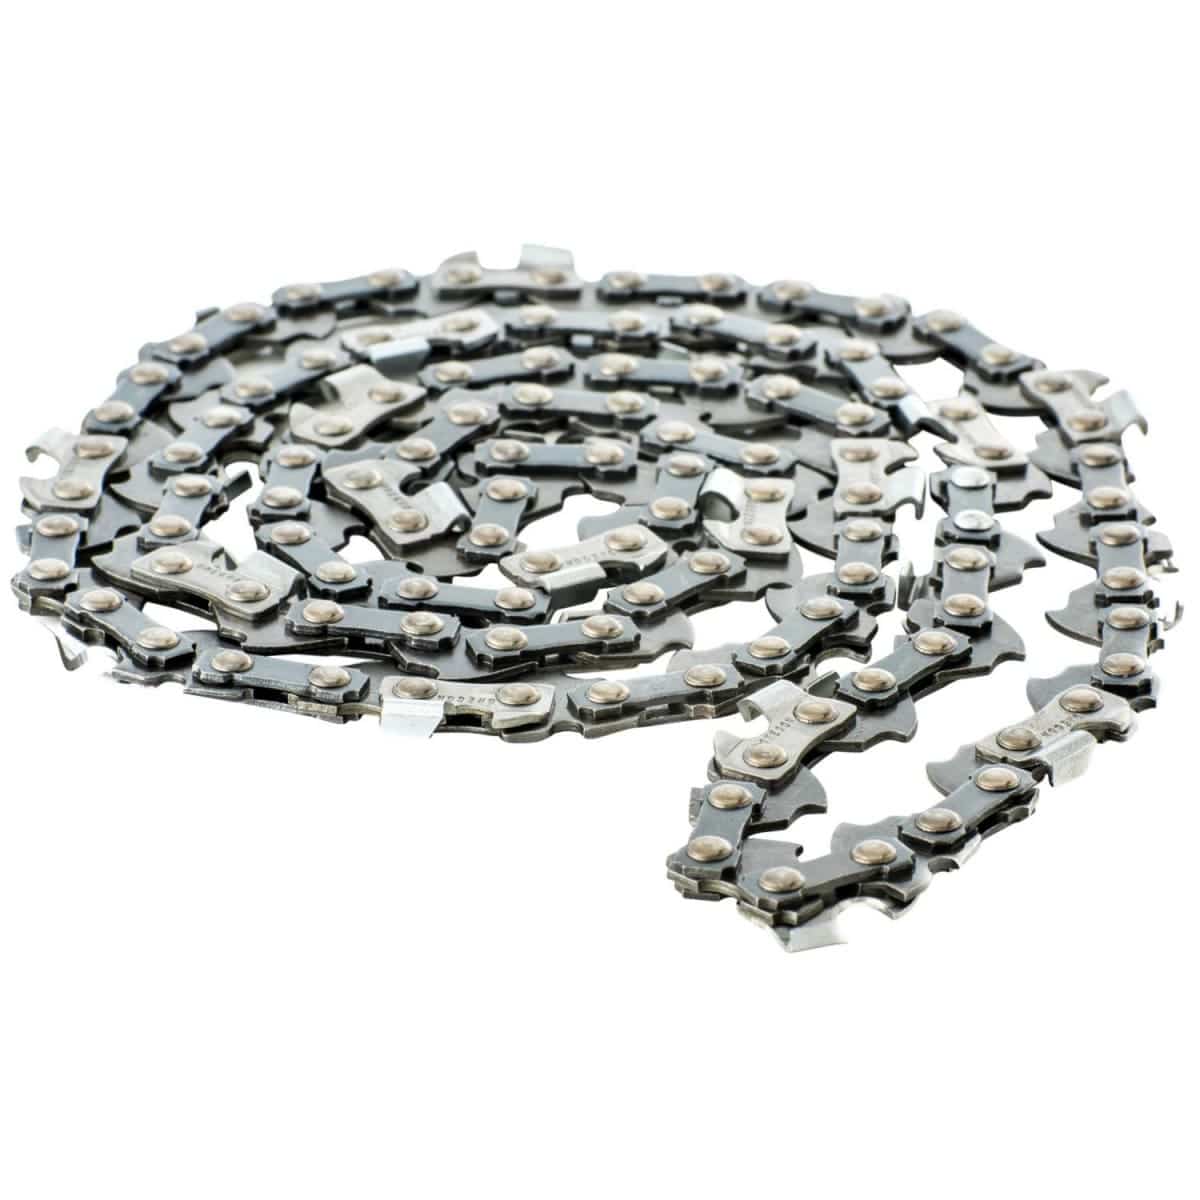 Ingco Saw Chain 24" - AGSC52401 | Supply Master Accra, Ghana Chainsaw Buy Tools hardware Building materials